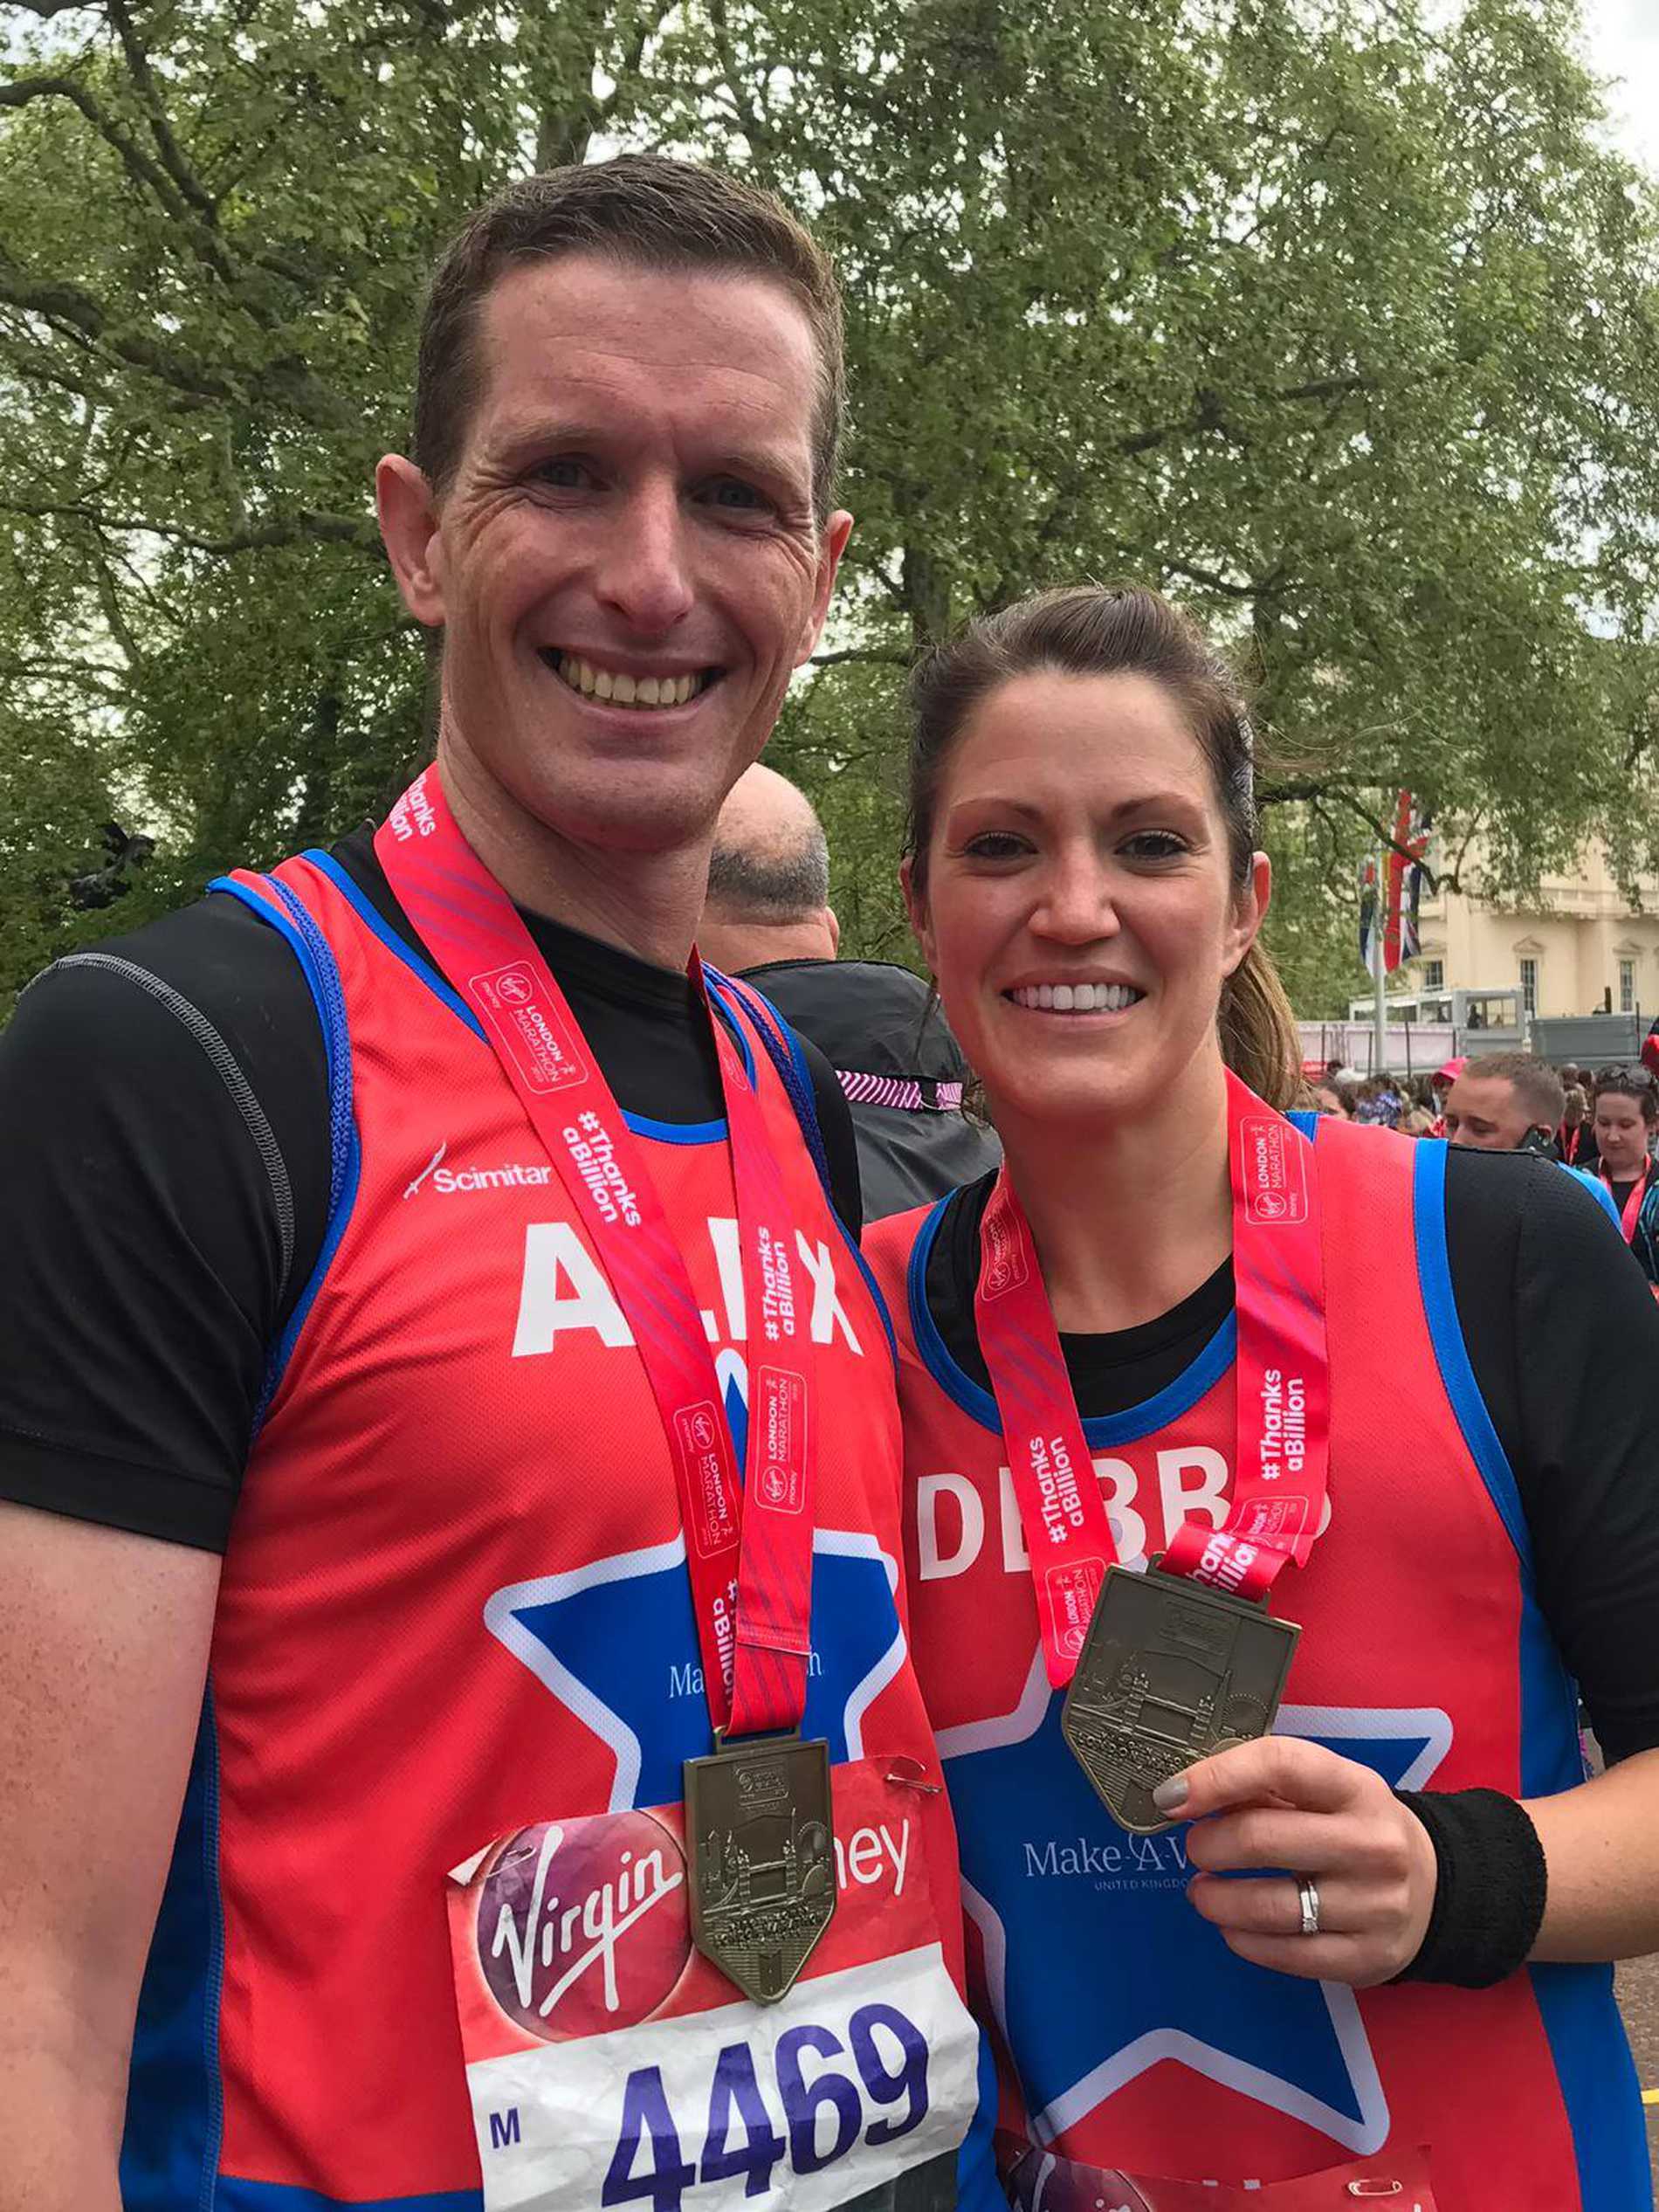 A couple of smiling runners with their London Marathon finishers medals.